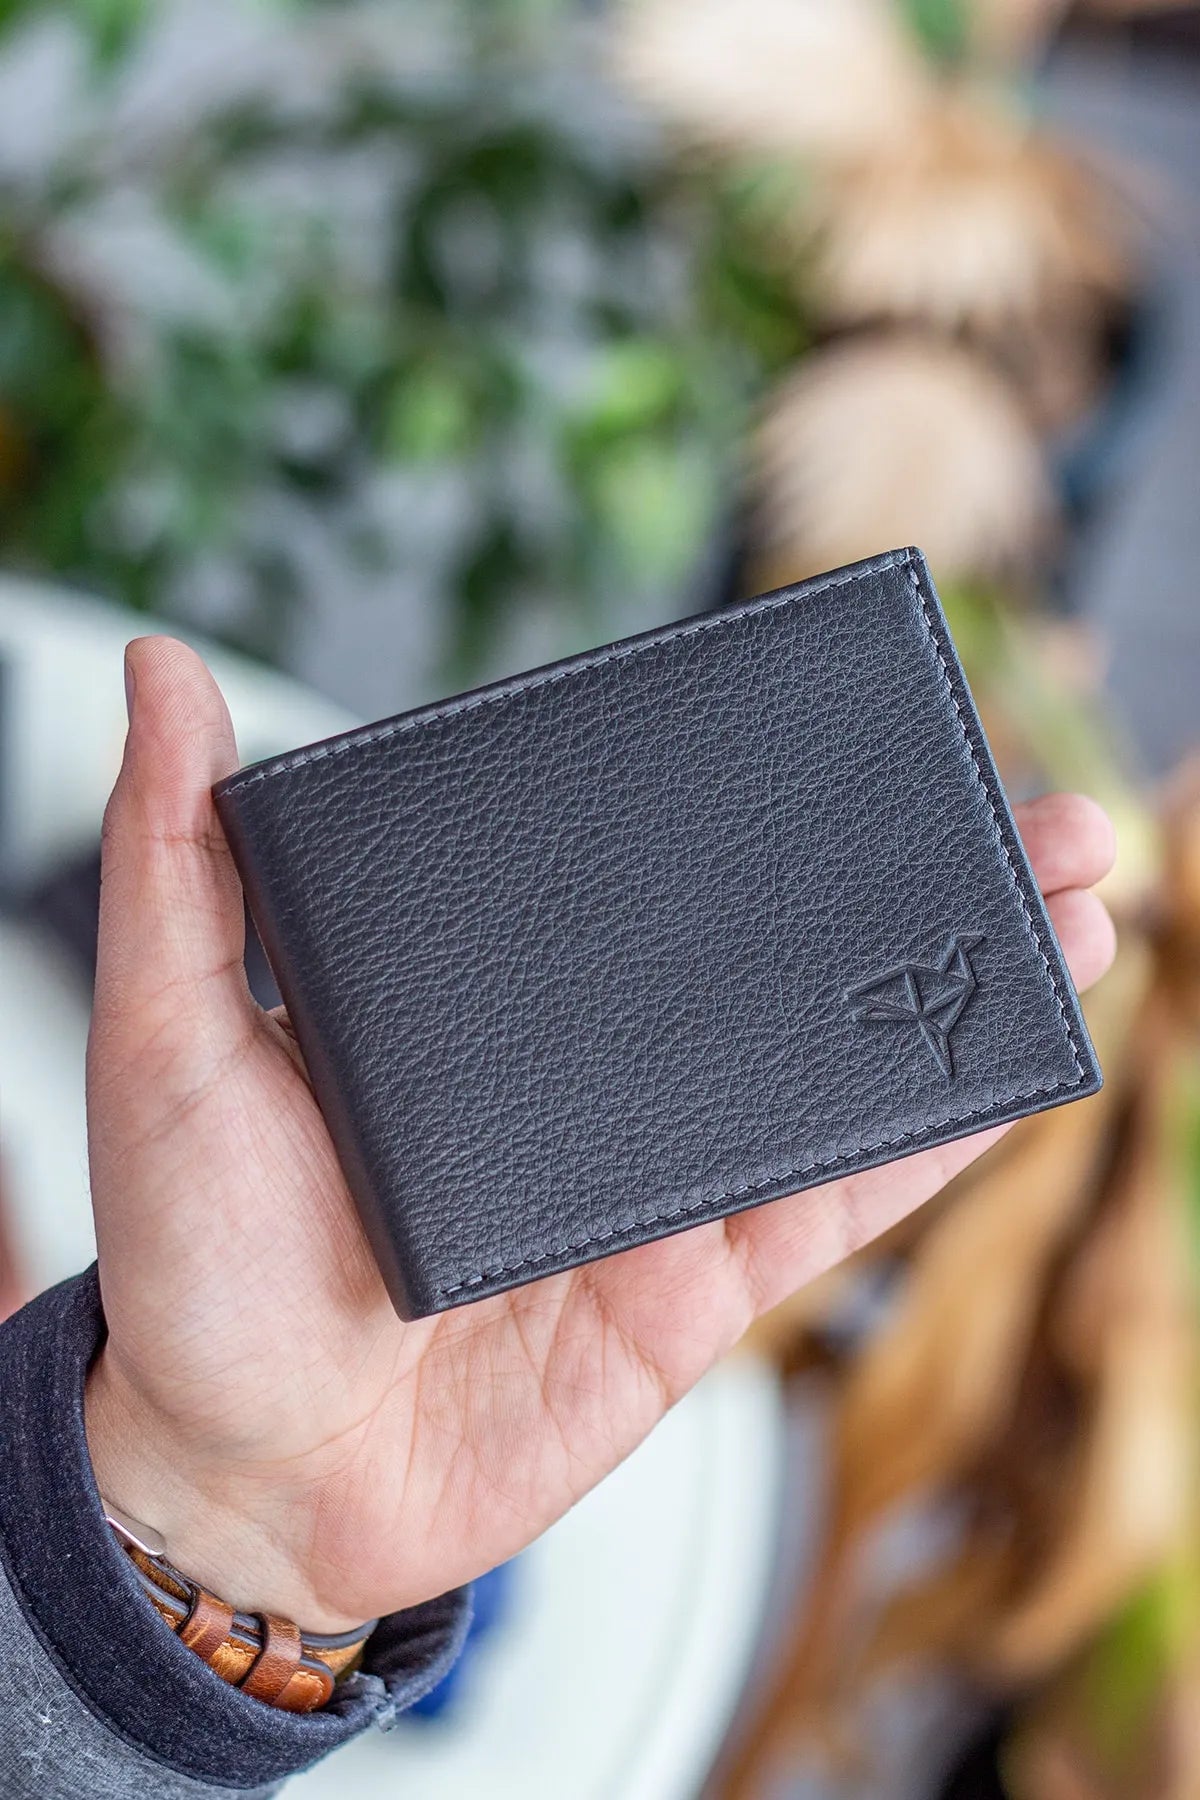 Jackson Genuine Leather RFID Blocking  Anthracite Wallet with Coin Compartment for Men: A Stylish and Secure Choice